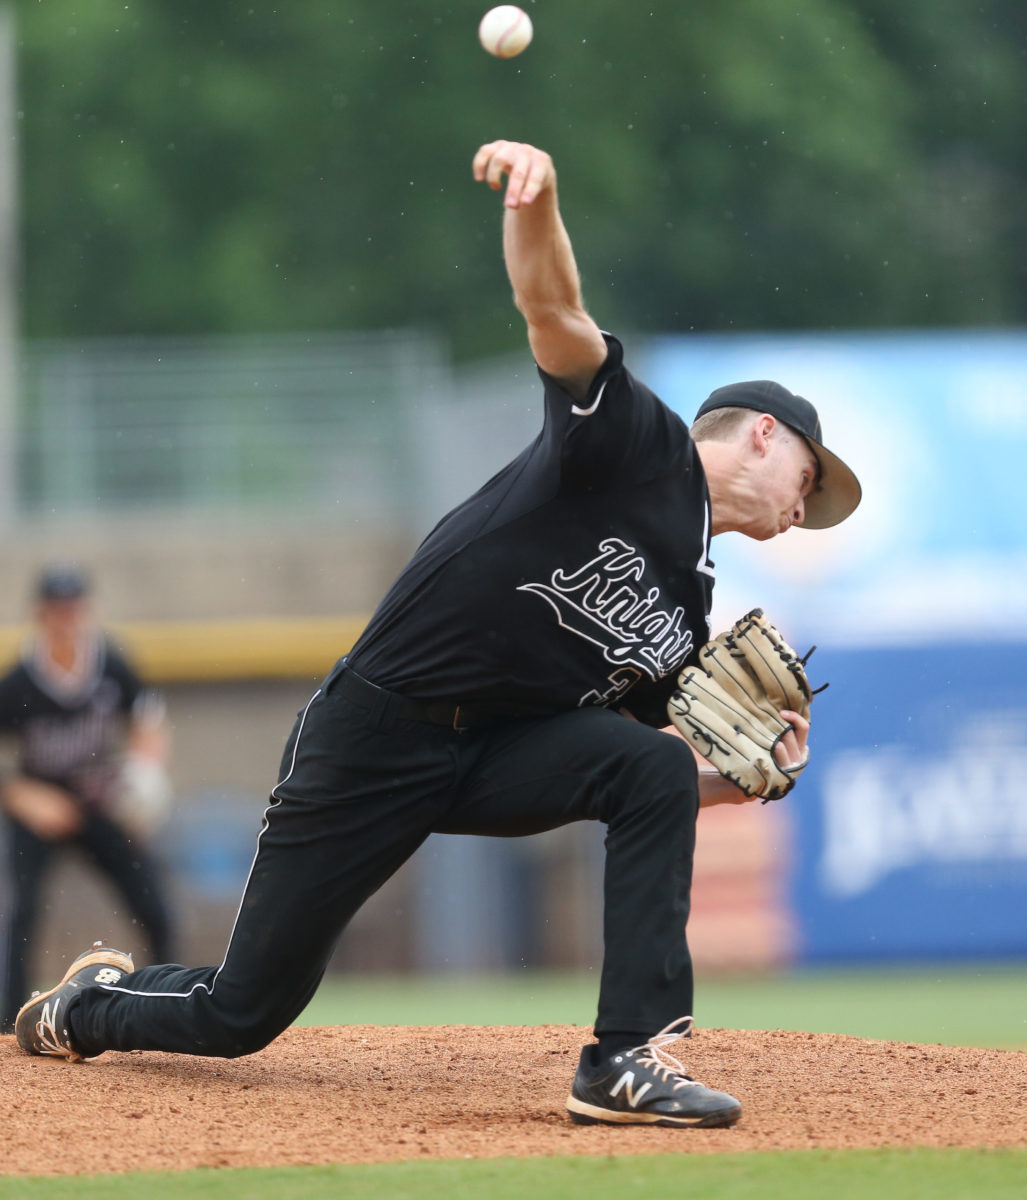 West Lauderdale's Mason Willis (33) releases a pitch in the second inning. West Lauderdale and Sumrall played in game 1 of the MHSAA Class 4A Baseball Championship on Friday, June 4, 2021 at Trustmark Park. Photo by Keith Warren